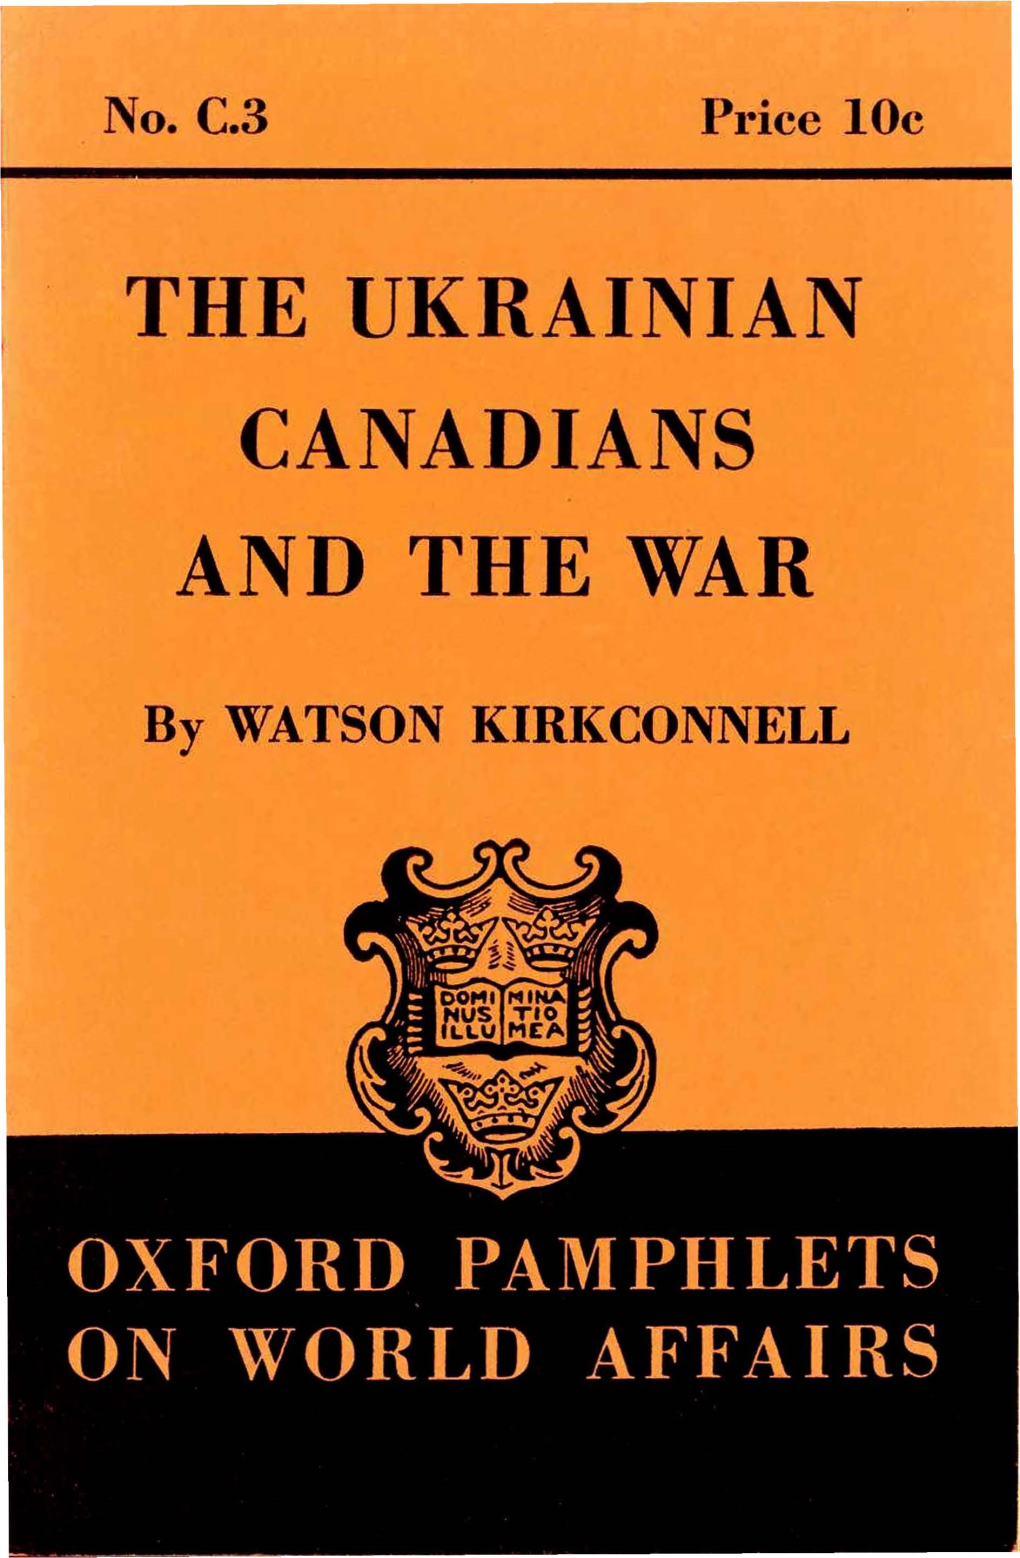 The Ukrainian Canadians and the War